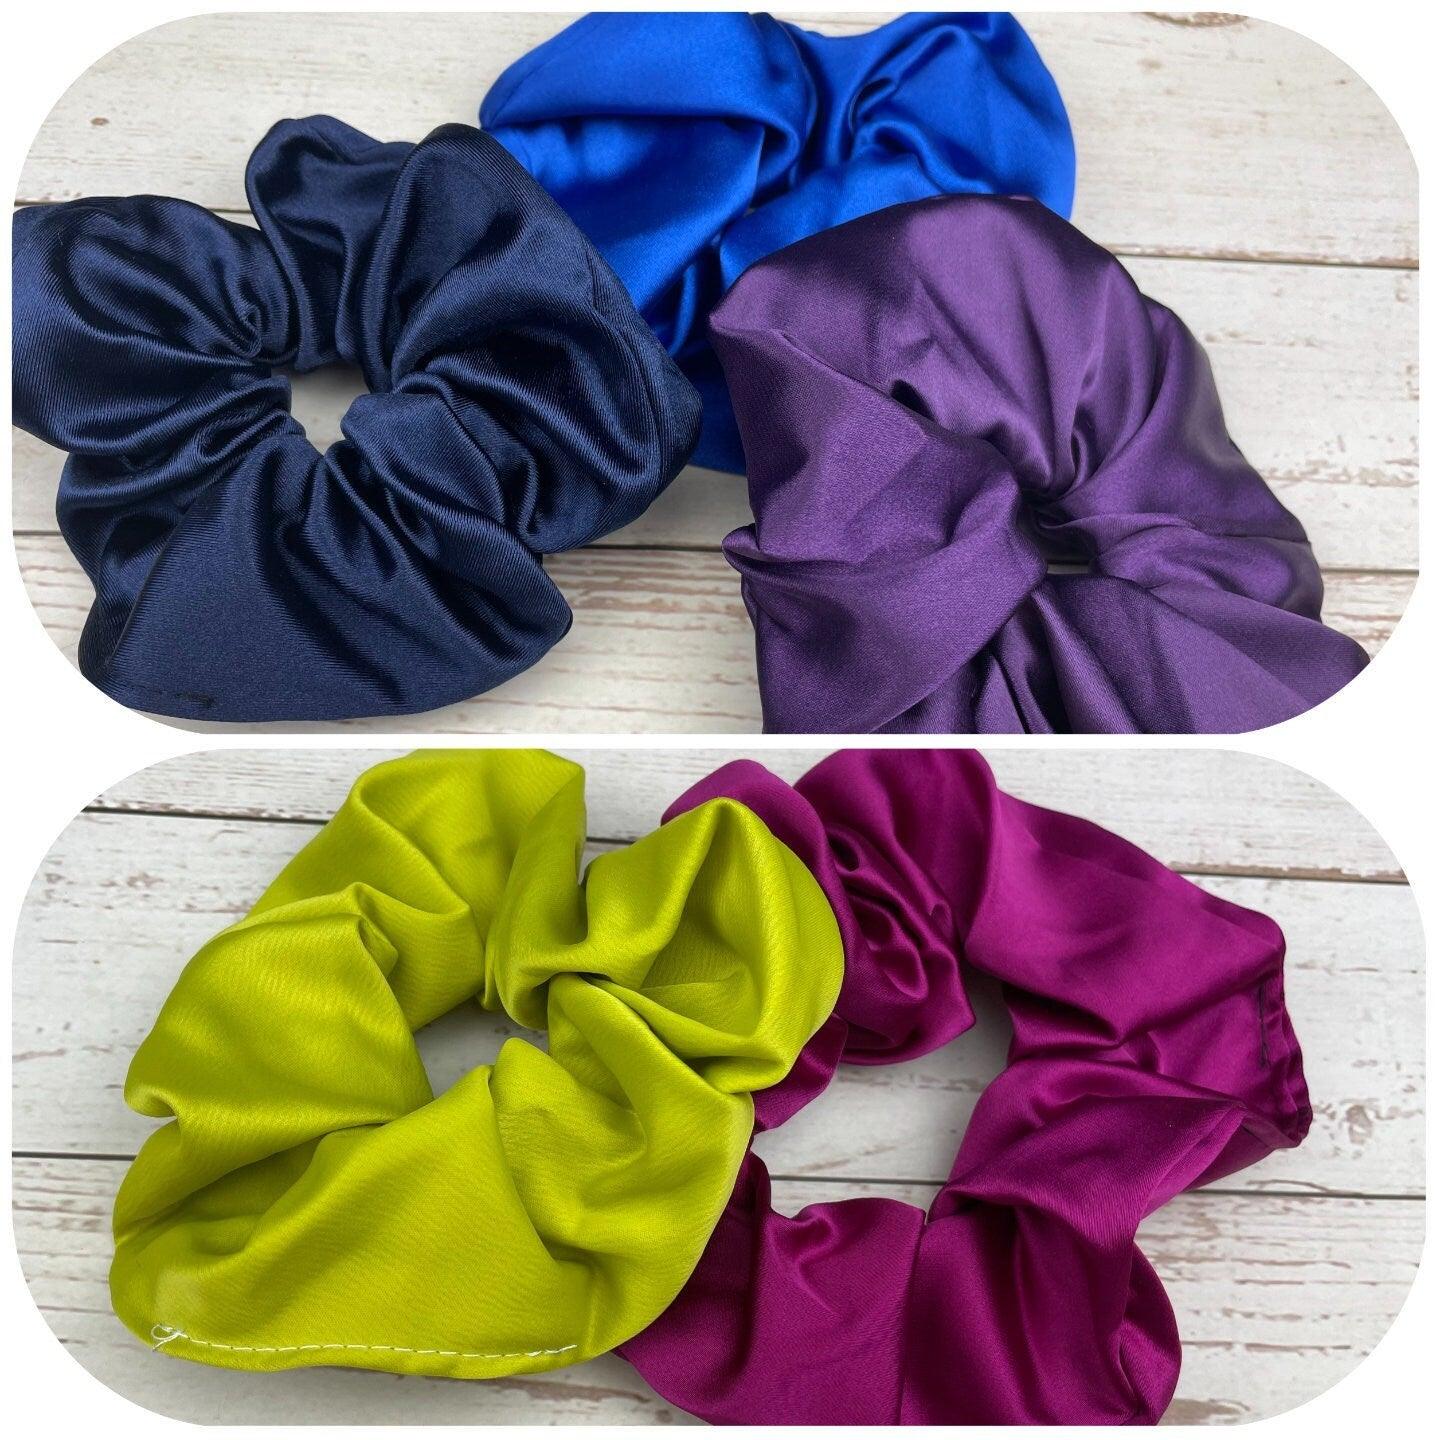 Stylish Handmade Satin Scrunchie with Bow, Colorful Hair Accessory in Parliament Blue, Purple, Dark Blue, Green and Fuchsia, Hair Ties Scrunchies available at Moyoni Design